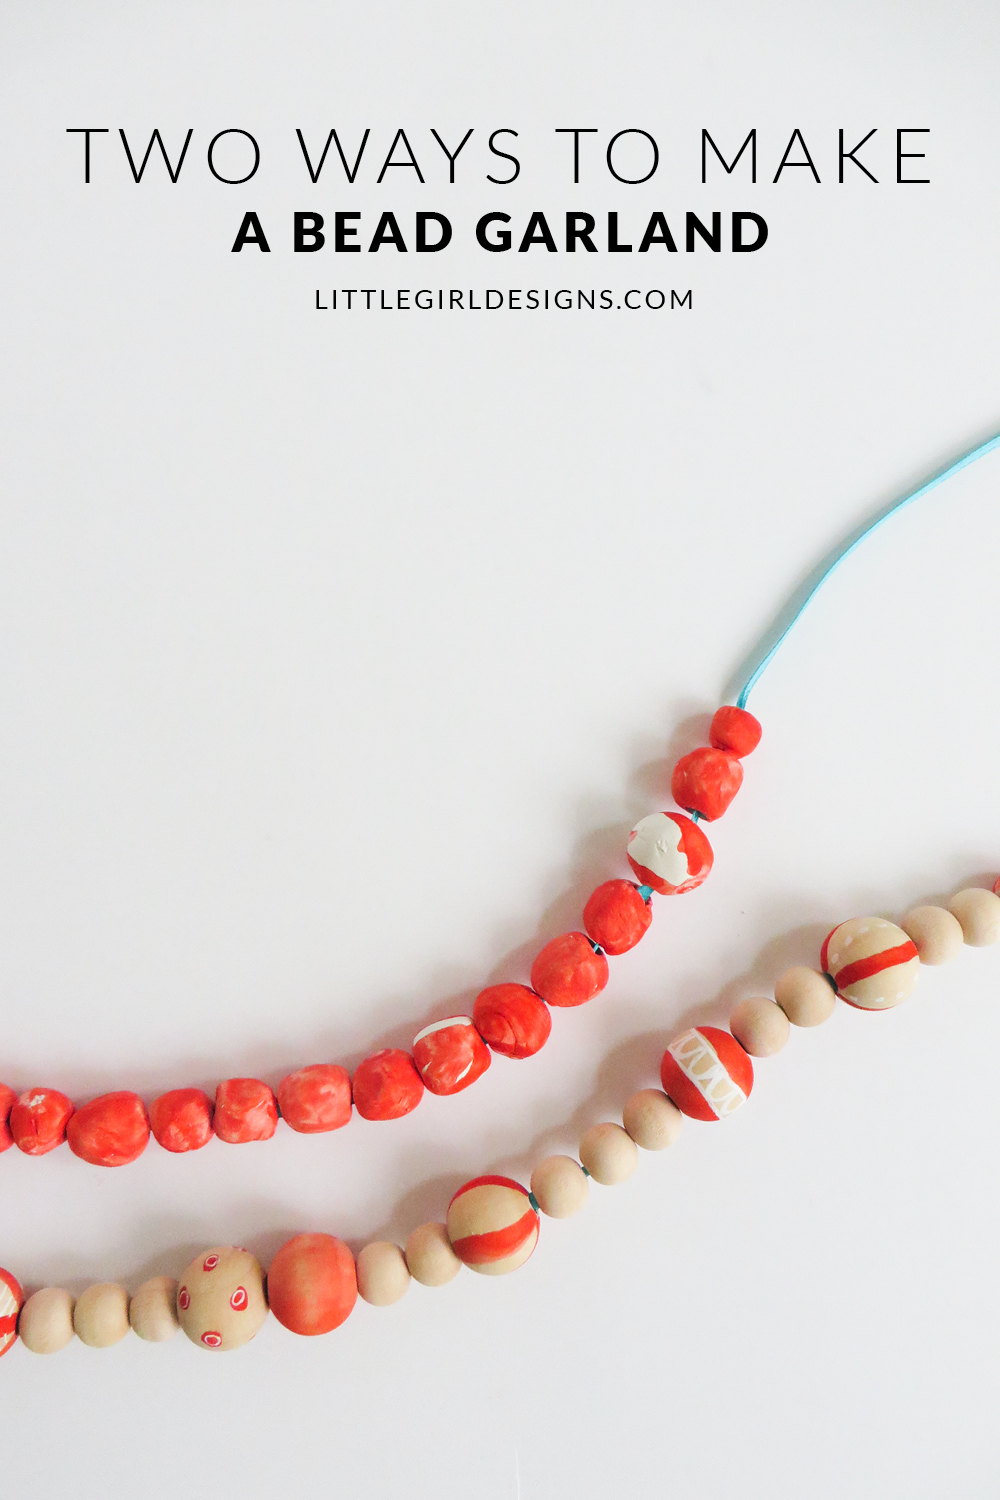 Two Ways to Make a Bead Garland